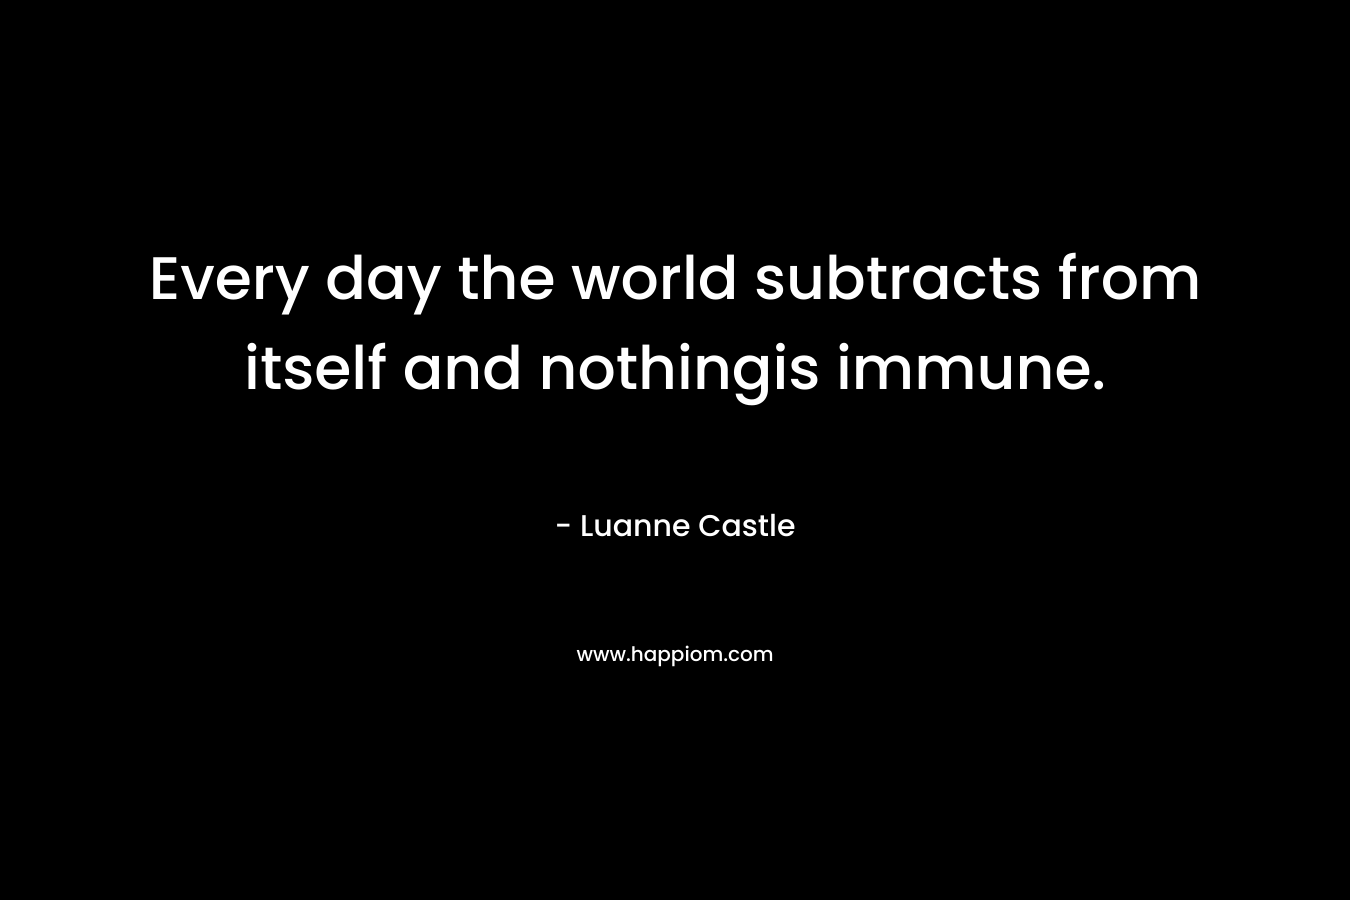 Every day the world subtracts from itself and nothingis immune. – Luanne Castle